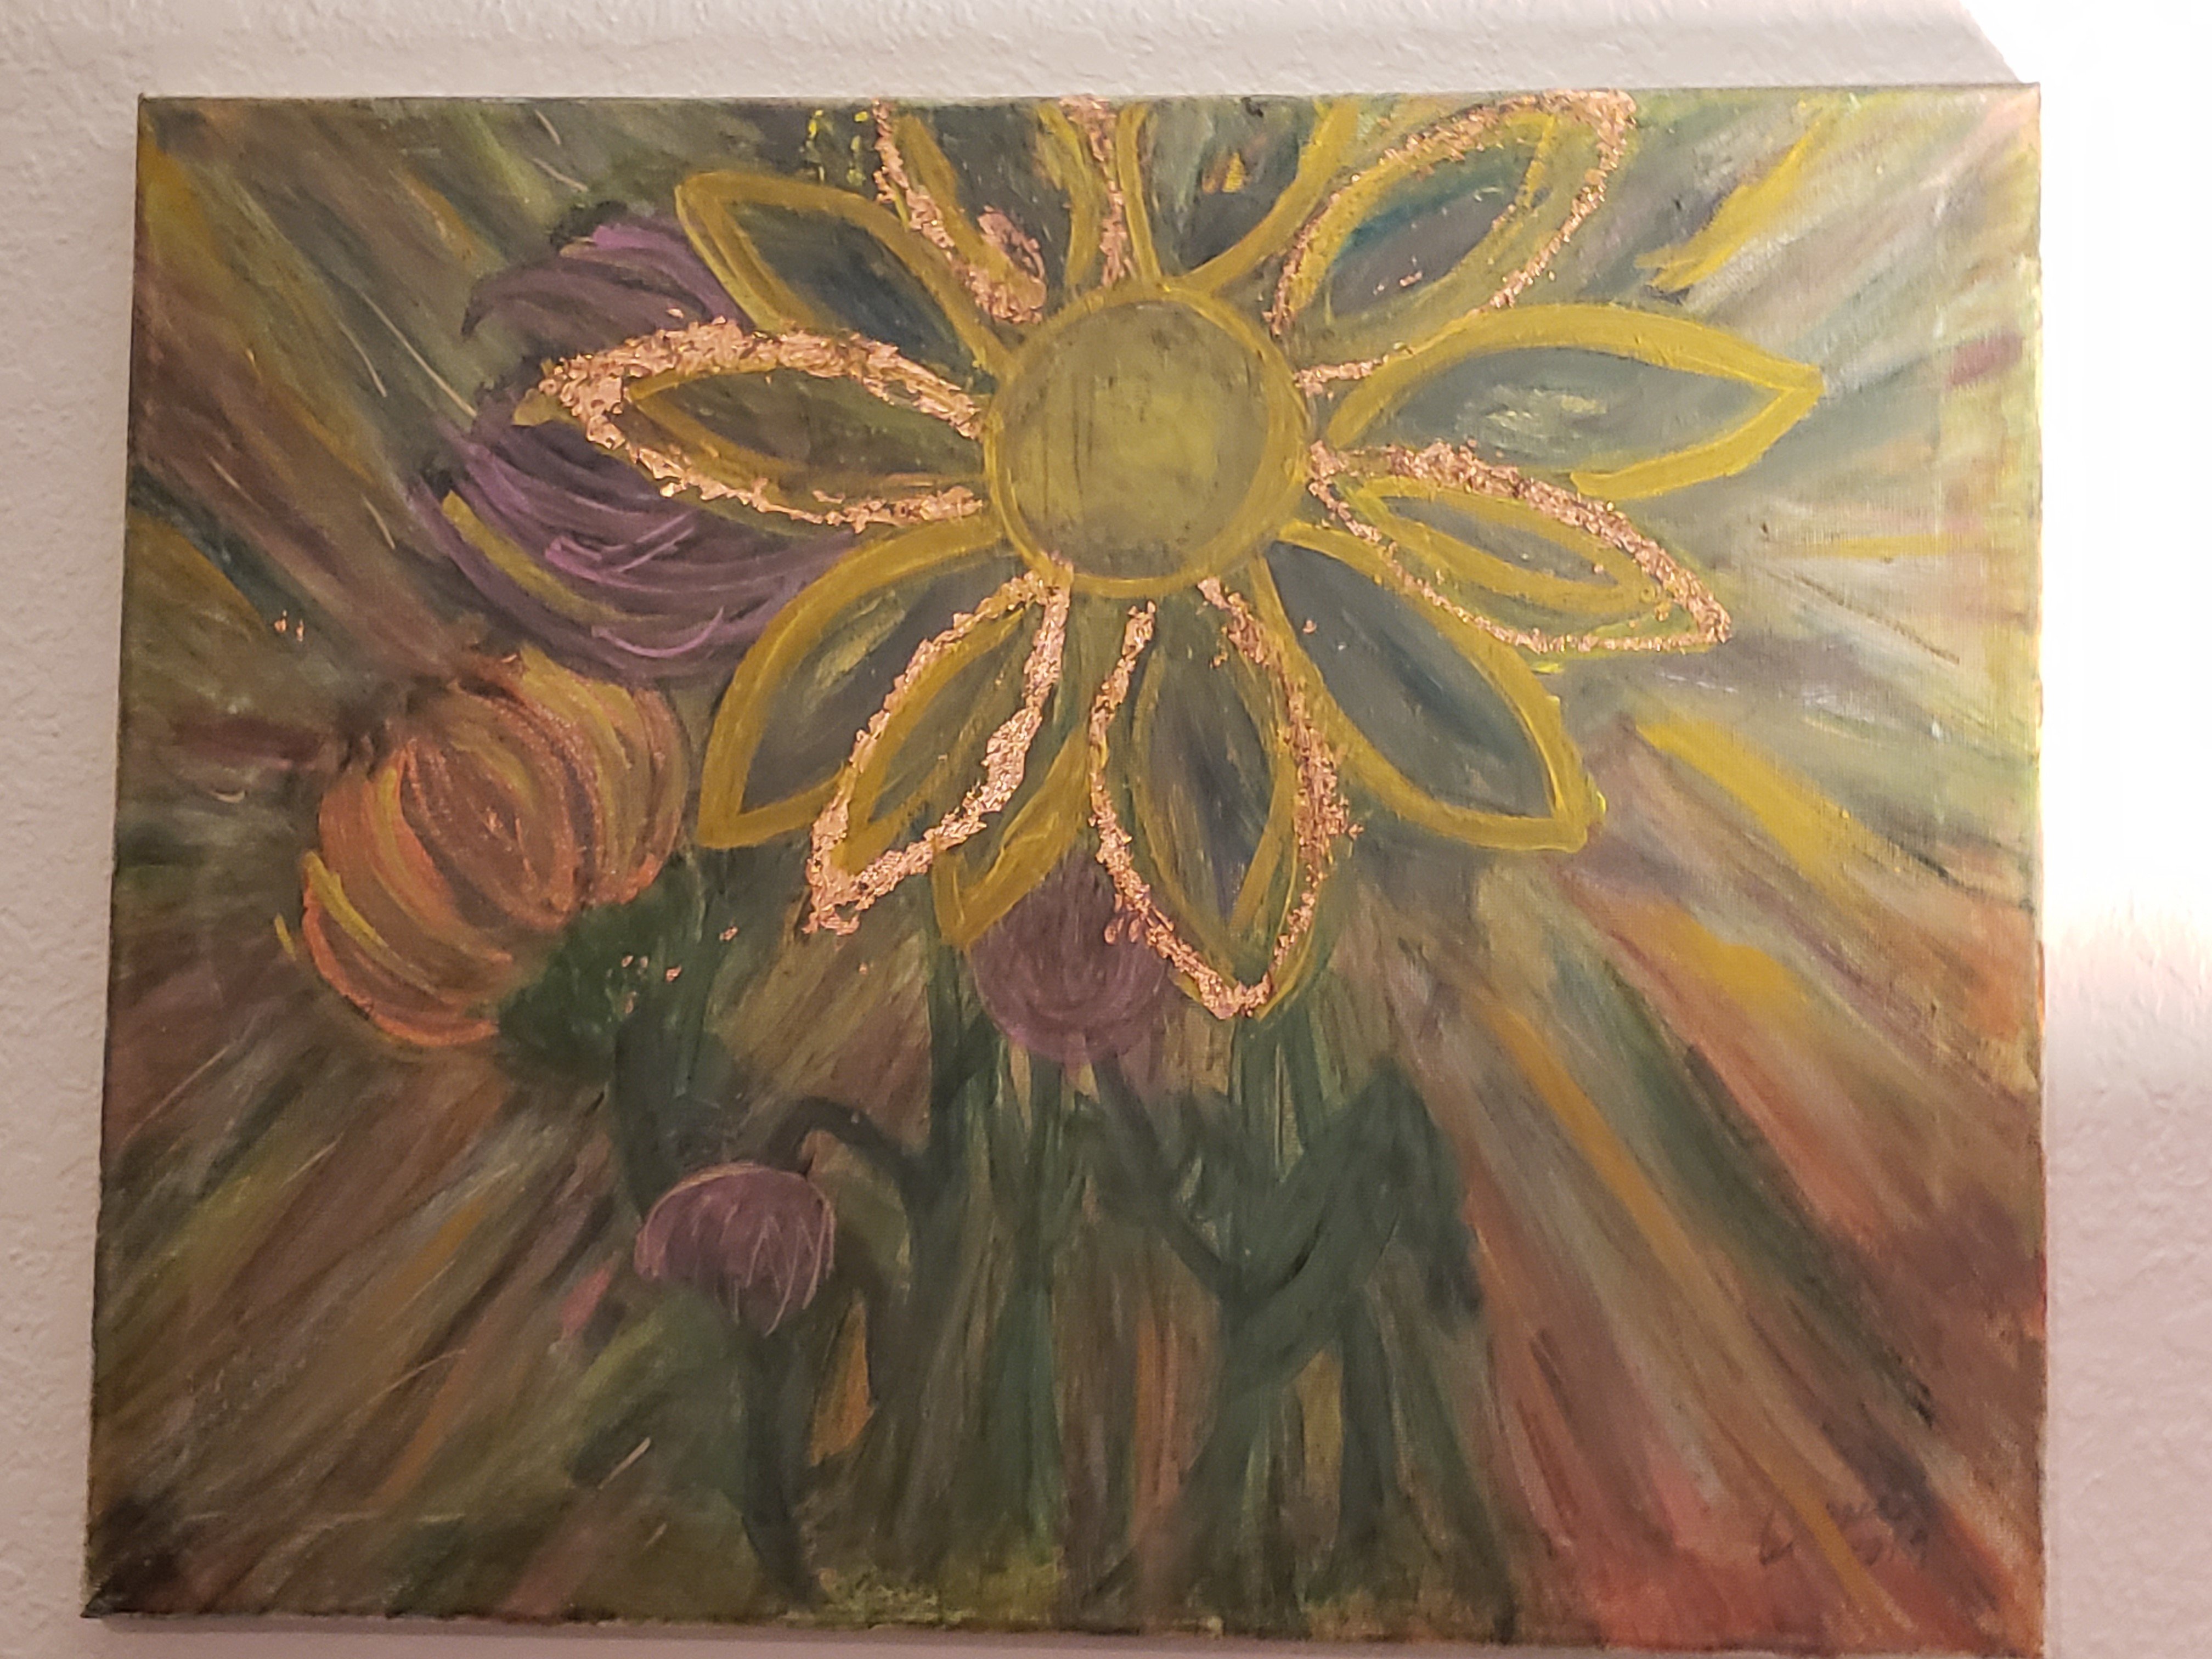 Carrie Morrison; Ascension Energies, 2019, Original Painting Acrylic, 20 x 16 inches. Artwork description: 241 This is my frepresentyation of the incoming ascension energies during the month of September 2019.  There is copper foil guilding on some flower petals. ...